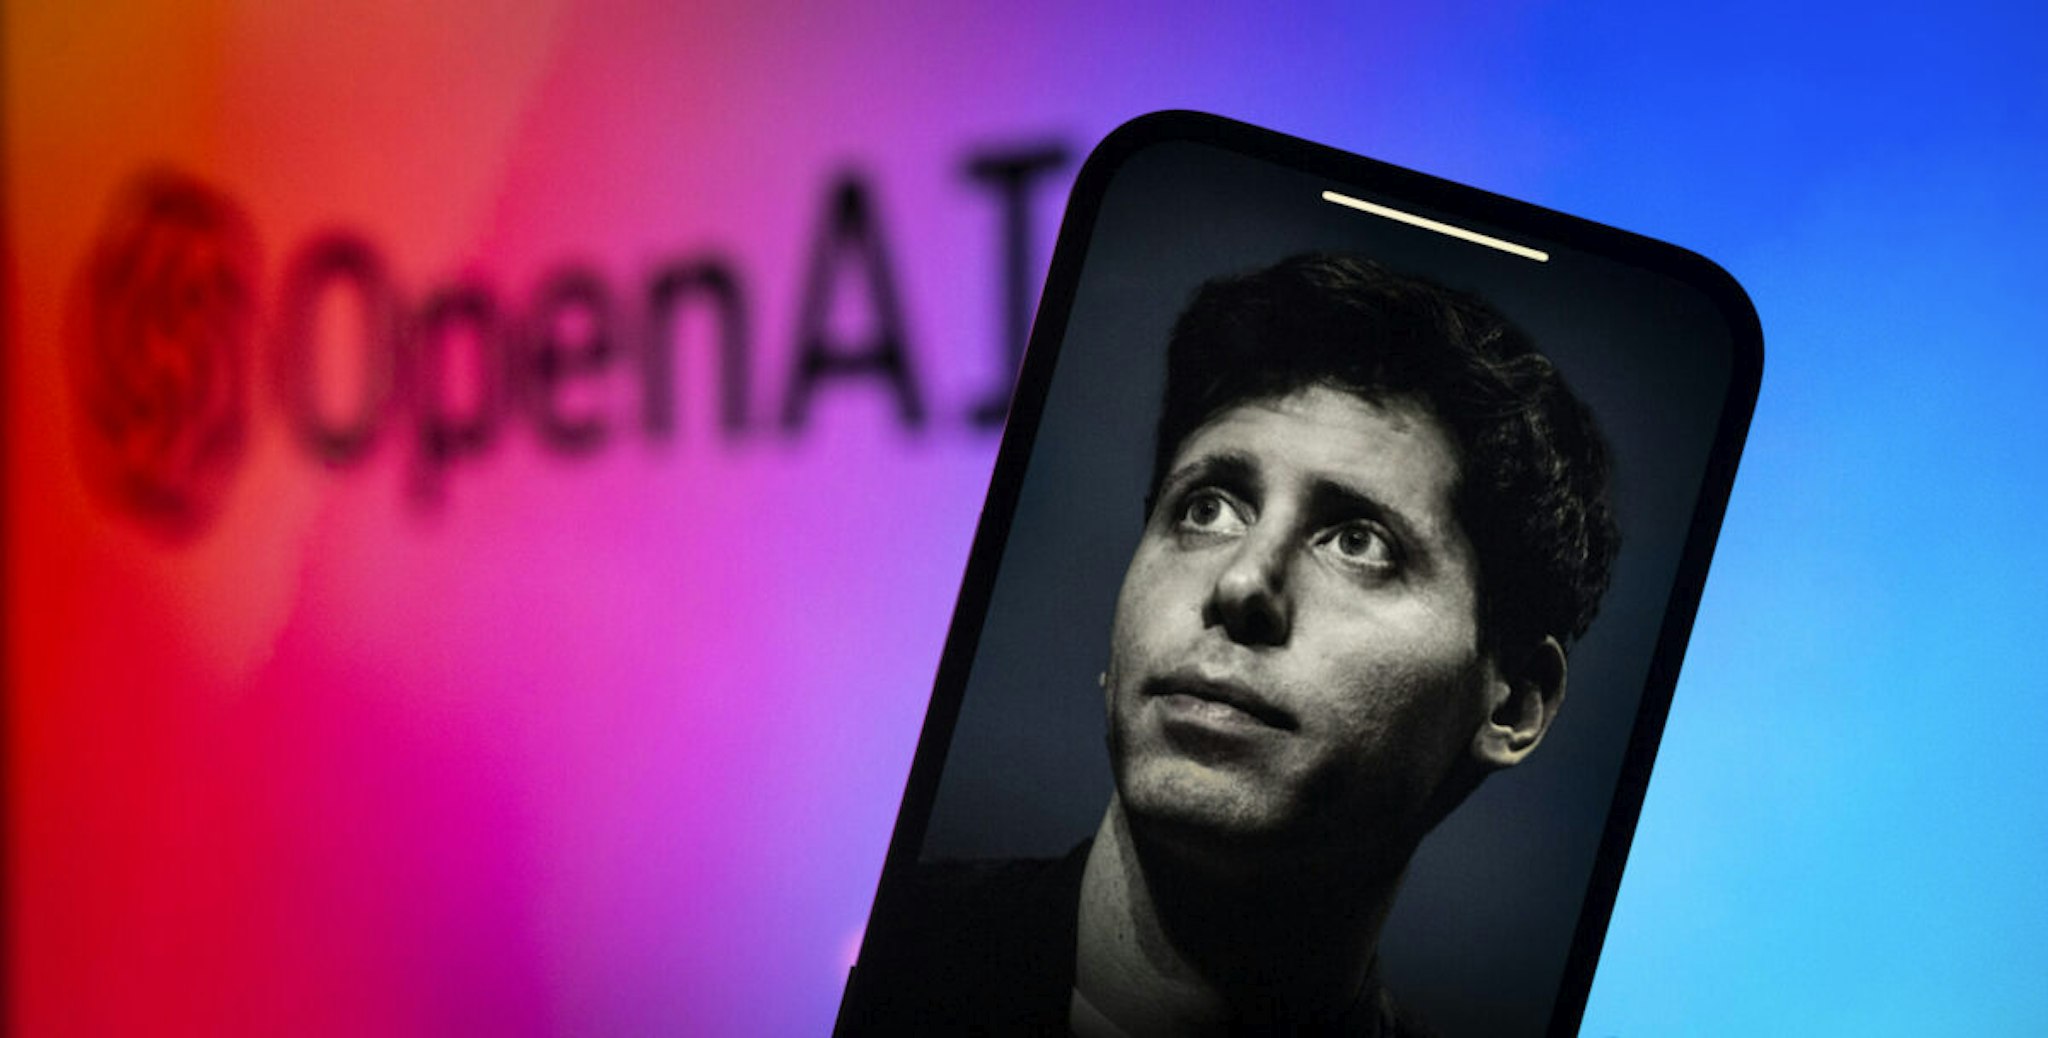 An effigy of former OpenAI CEO Sam Altman is seen on a mobile device screen in this illustration photo taken in Warsaw, Poland on 21 November, 2023.